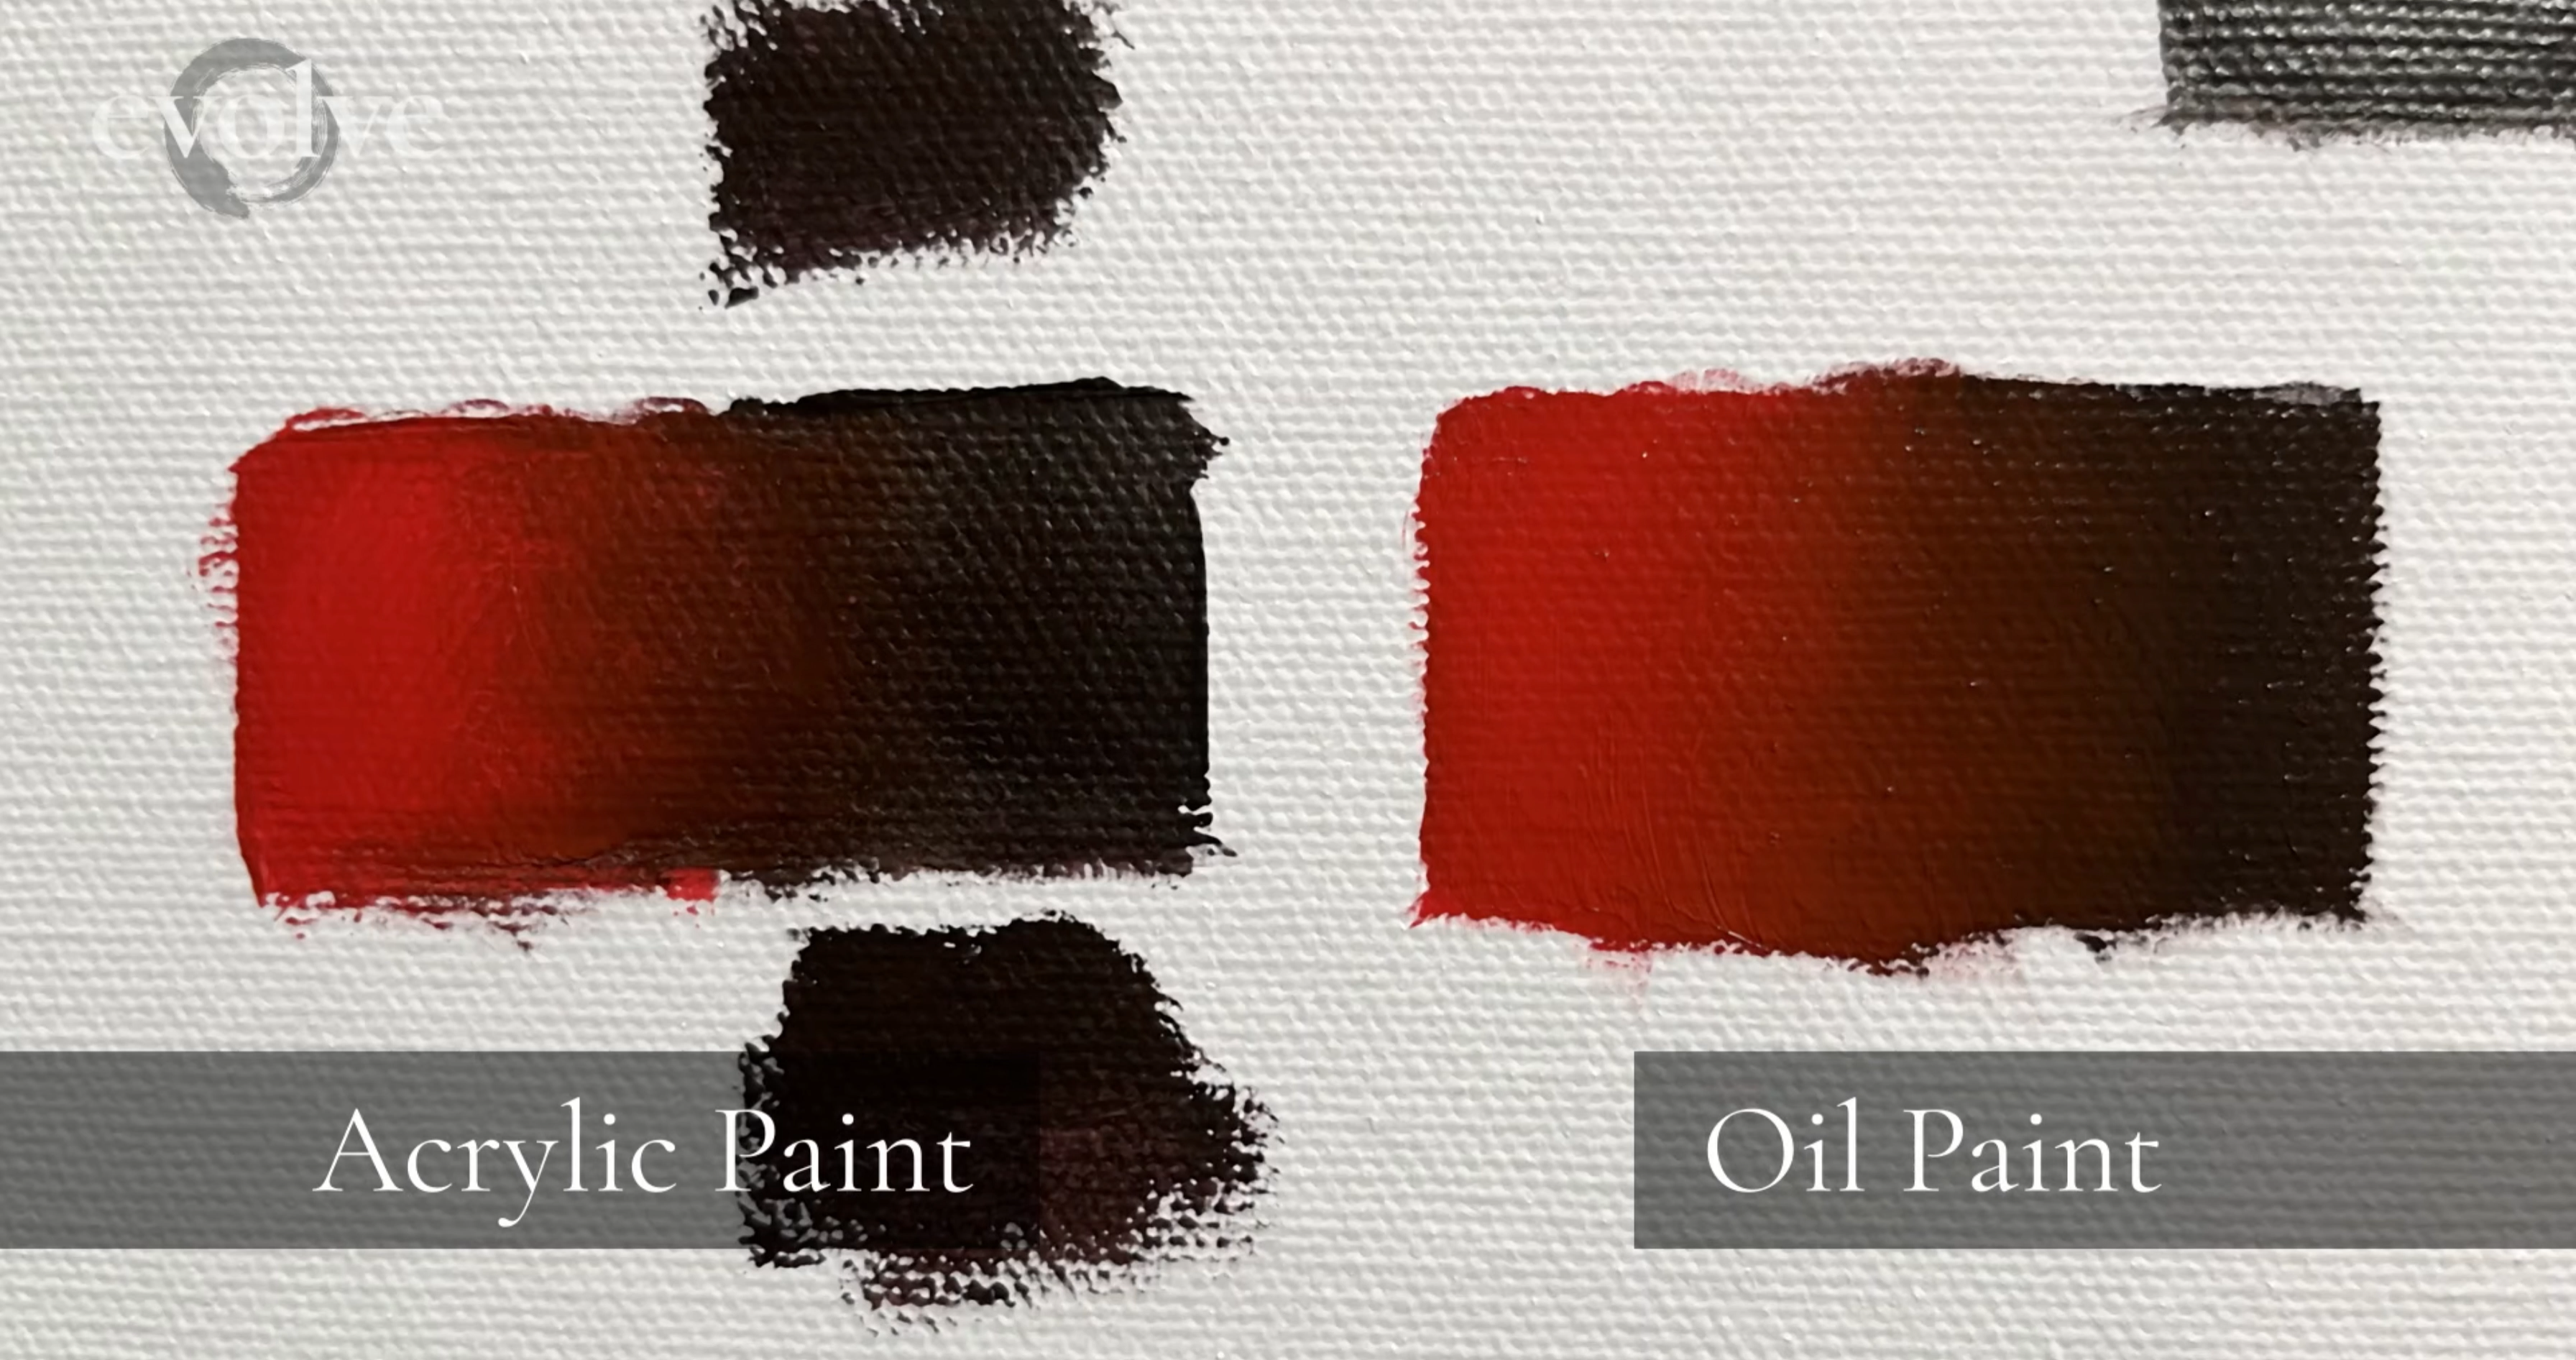 Acrylic vs oil paint: oil paint is far more superior in mixing paint on a canvas than acrylic. 